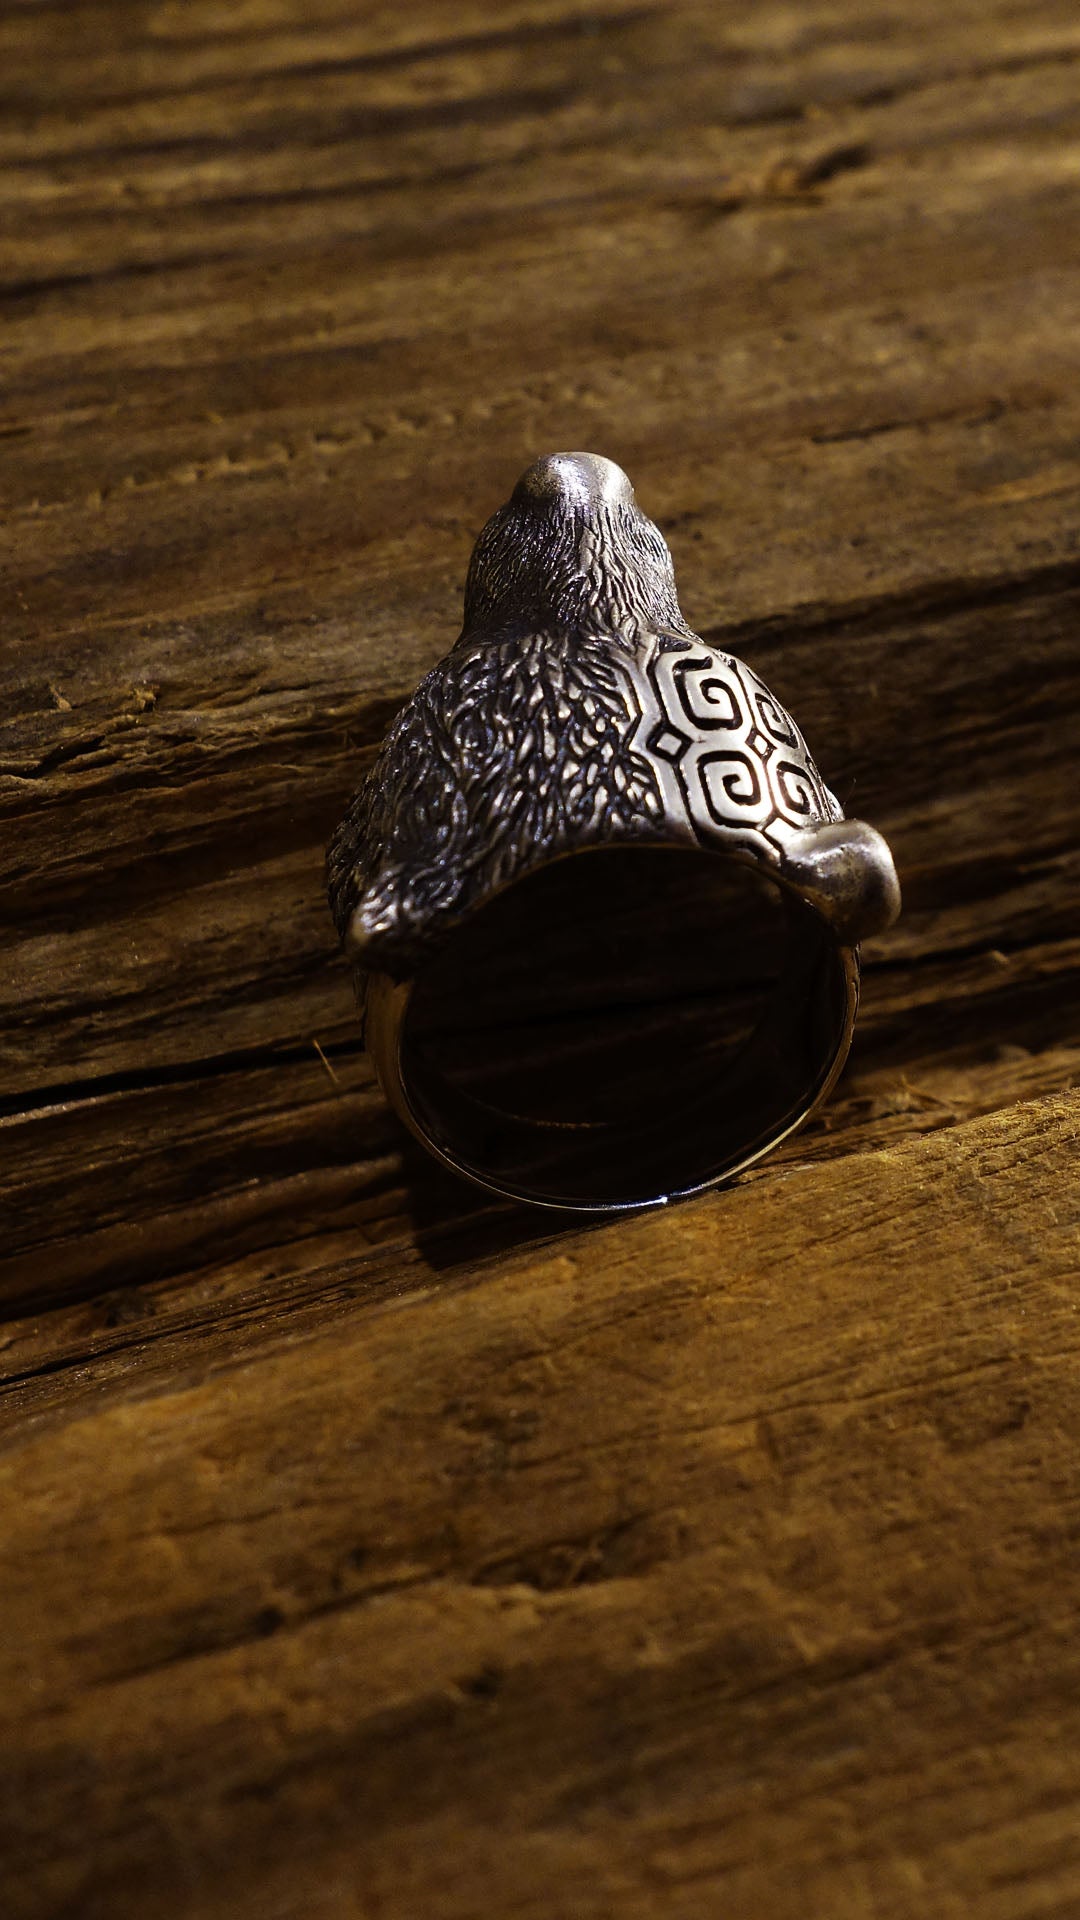 Bear ring with Ainu pattern